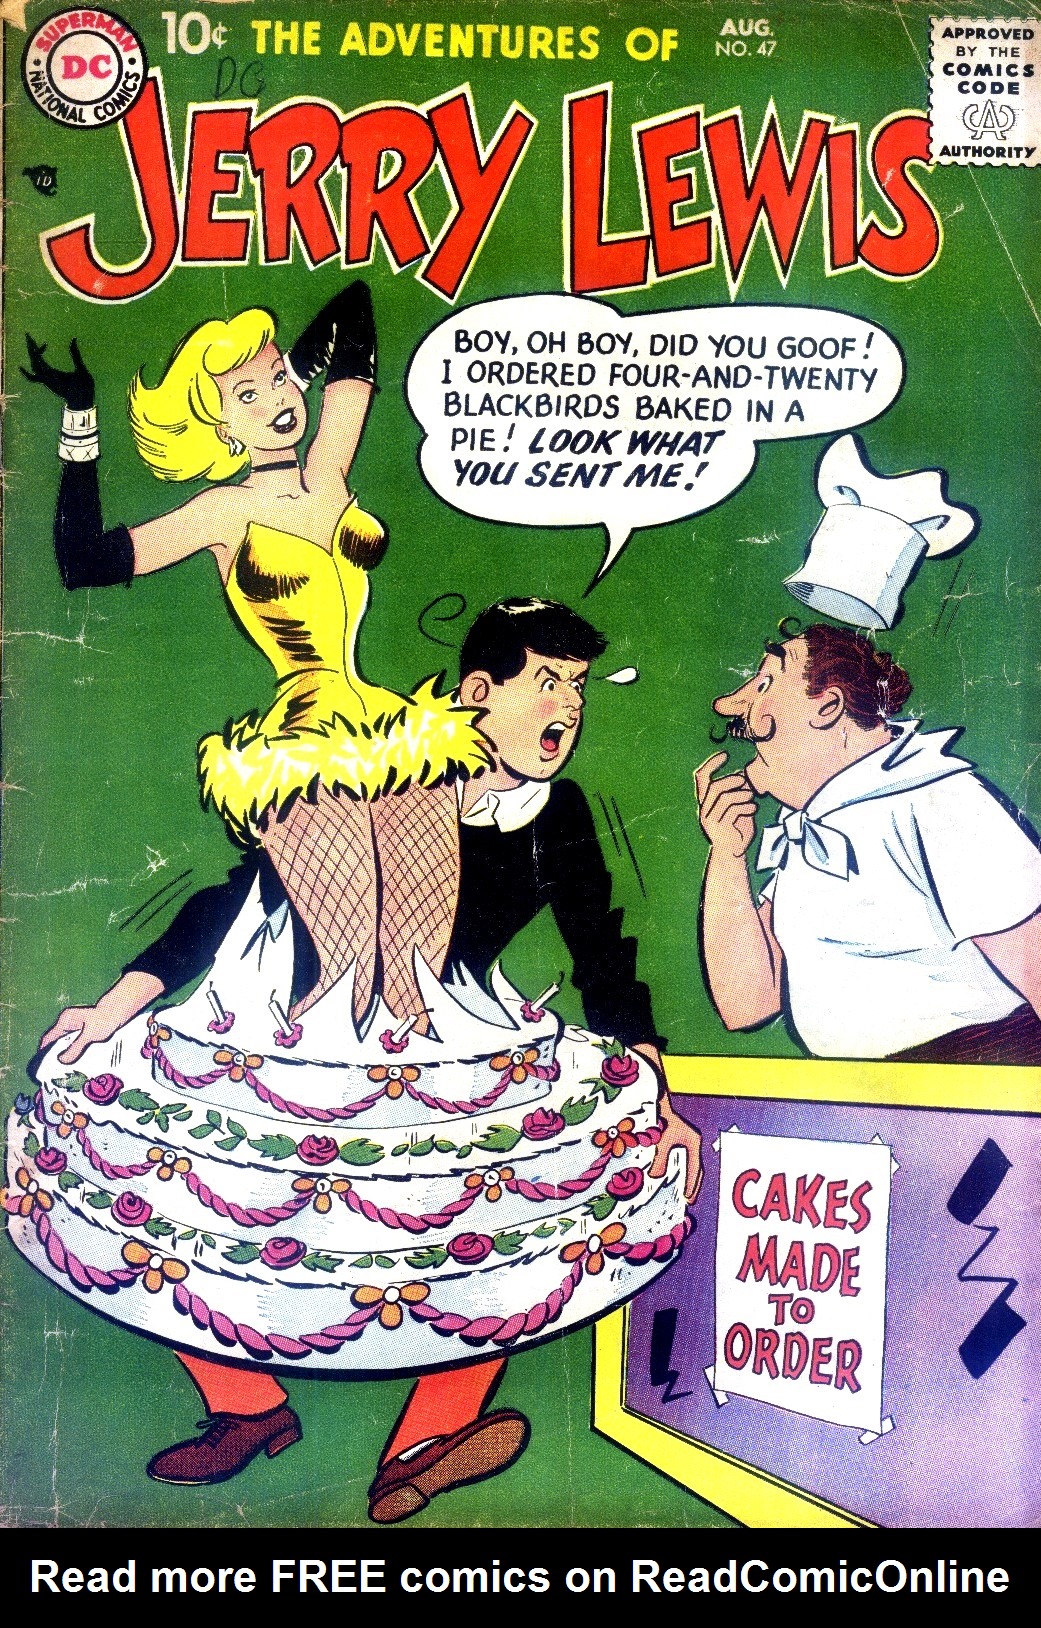 Read online The Adventures of Jerry Lewis comic -  Issue #47 - 1